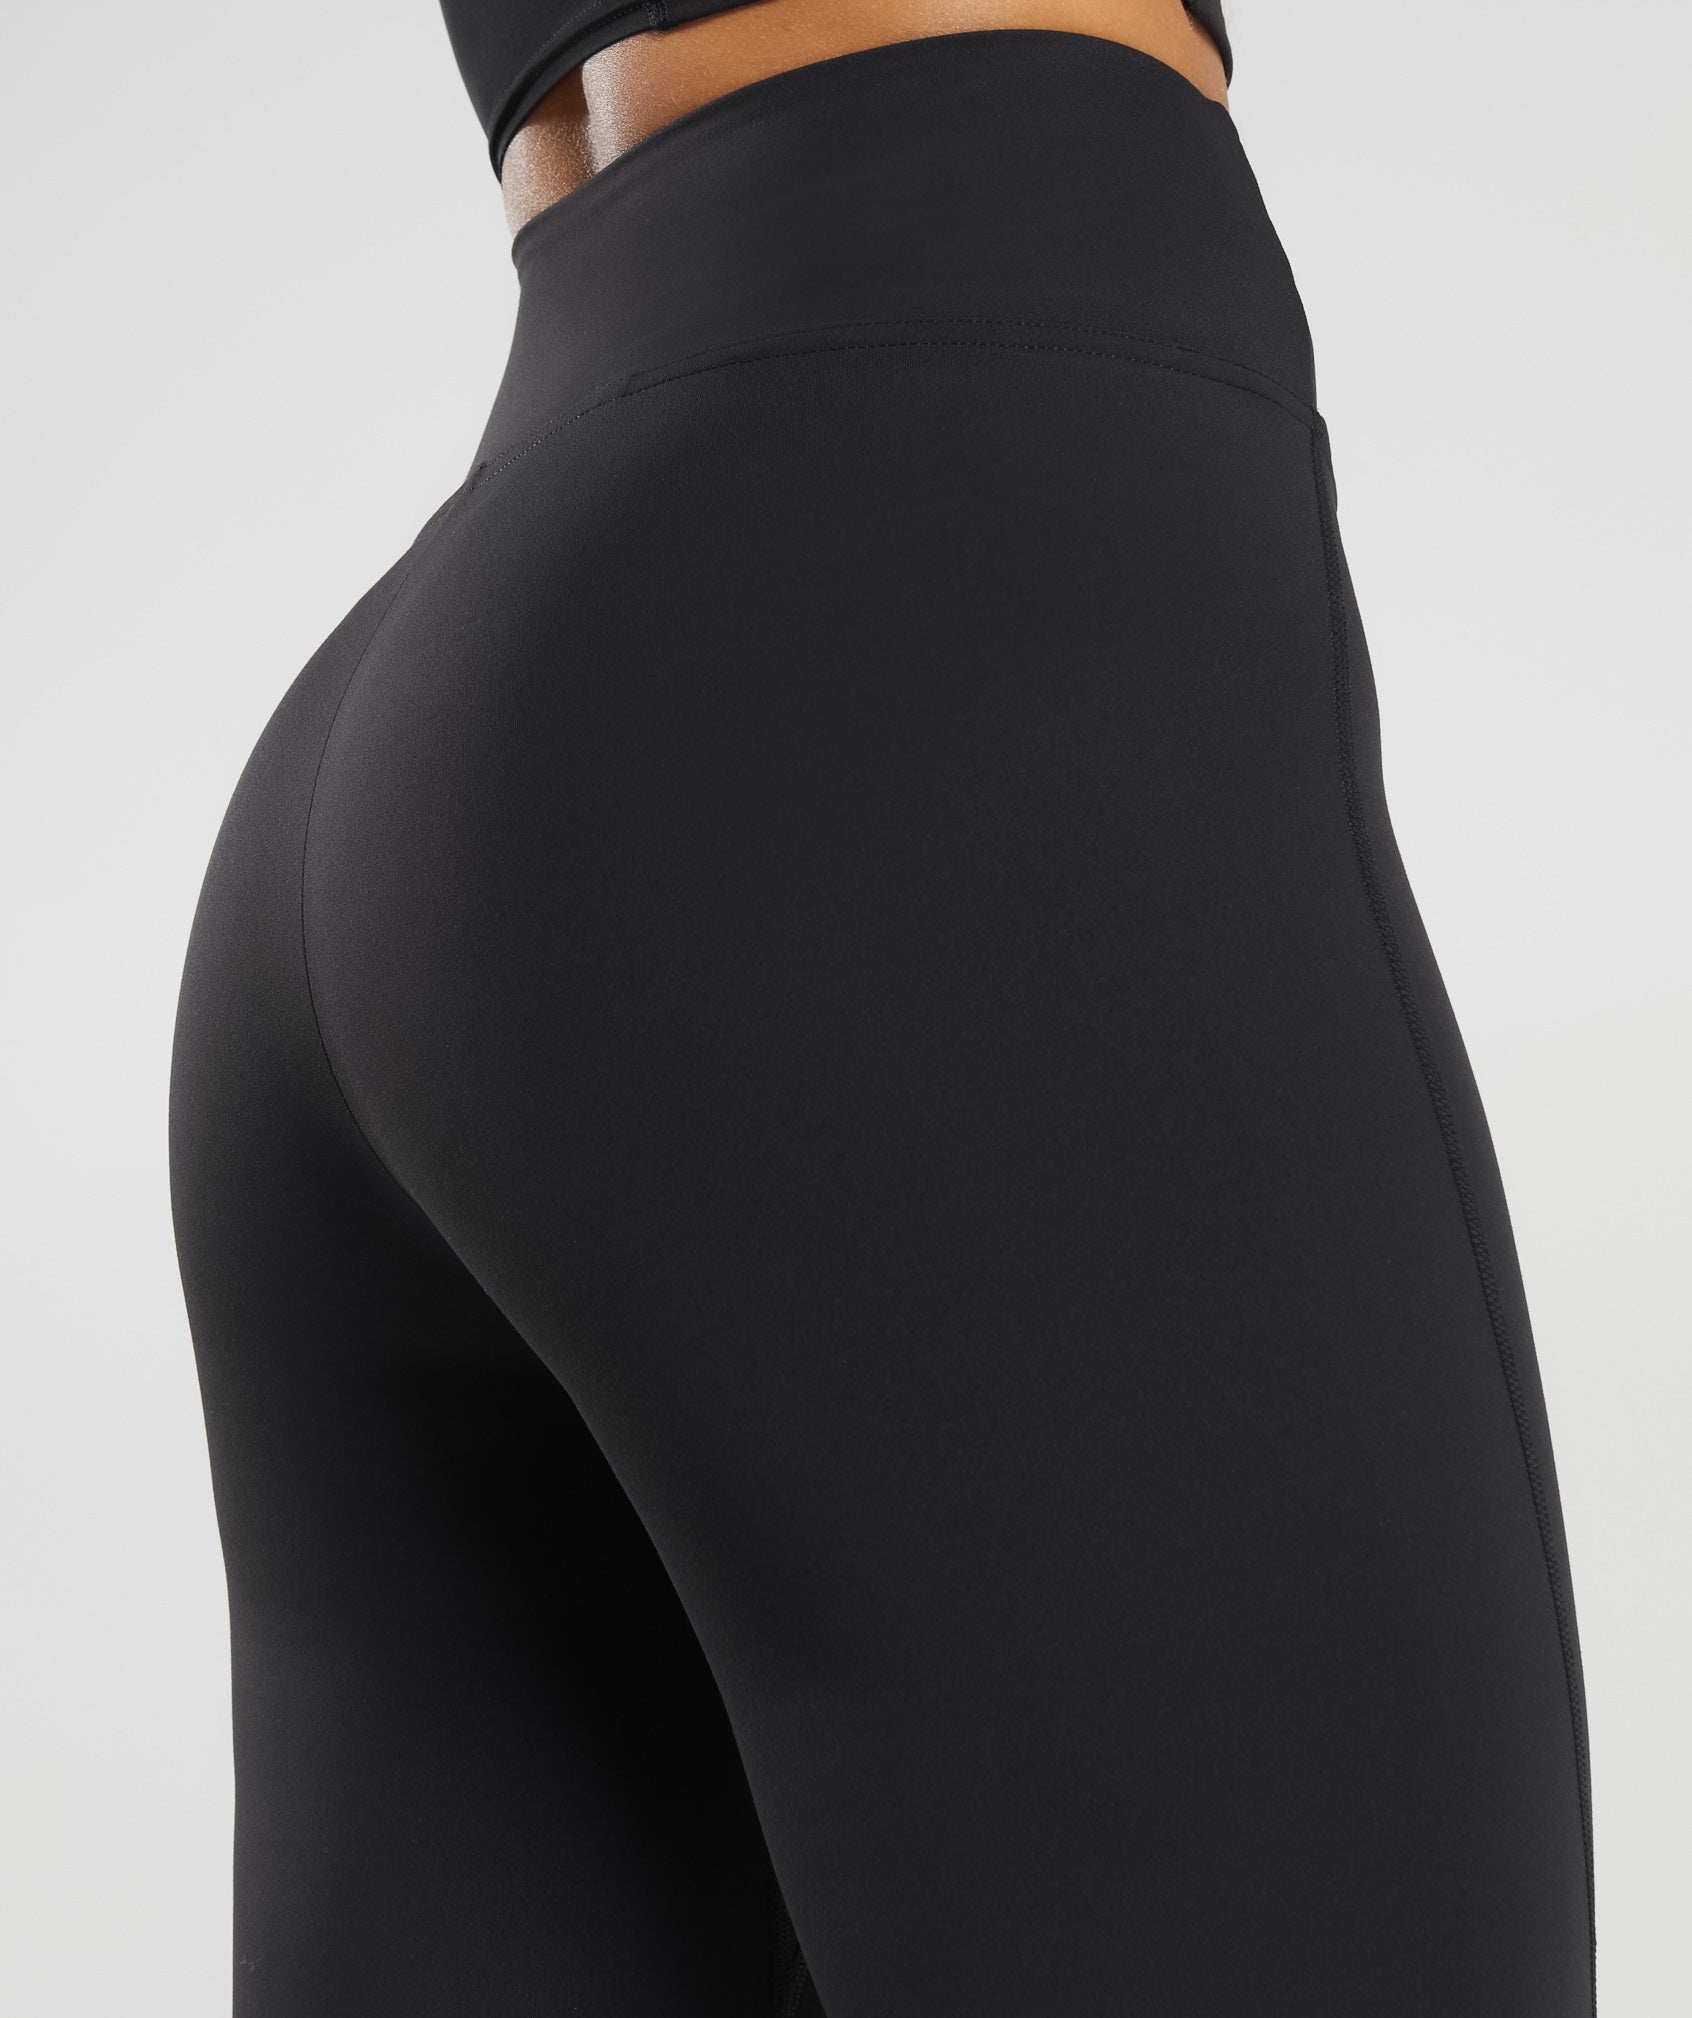 Fell in love with the gymshark flares! A must have for fall! #gymshark, flare leggings